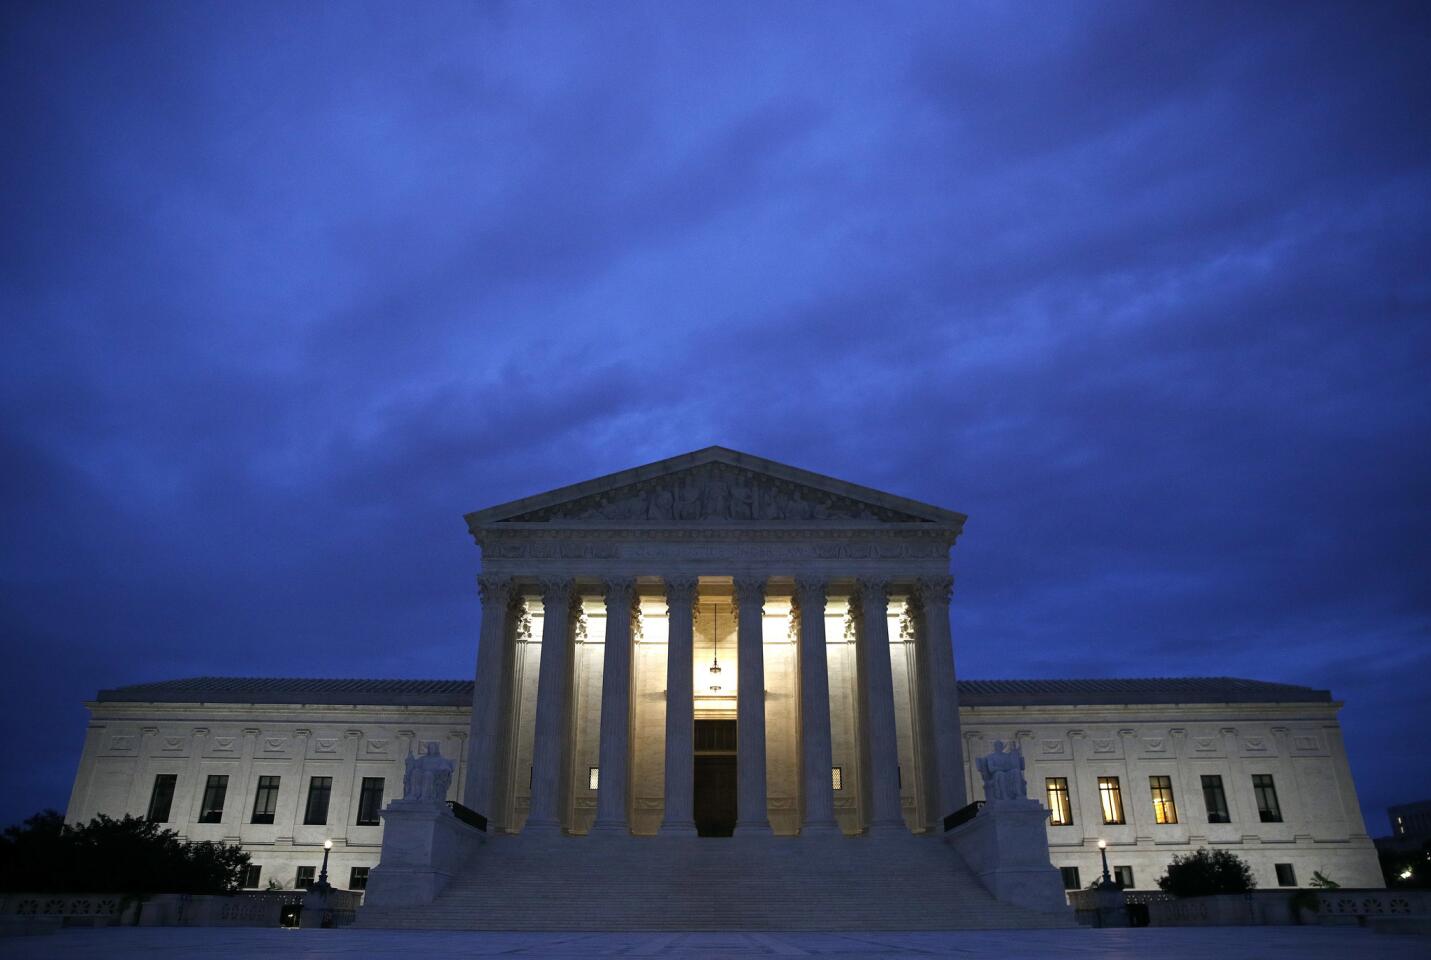 The Supreme Court building is seen at dawn on Capitol Hill in Washington.